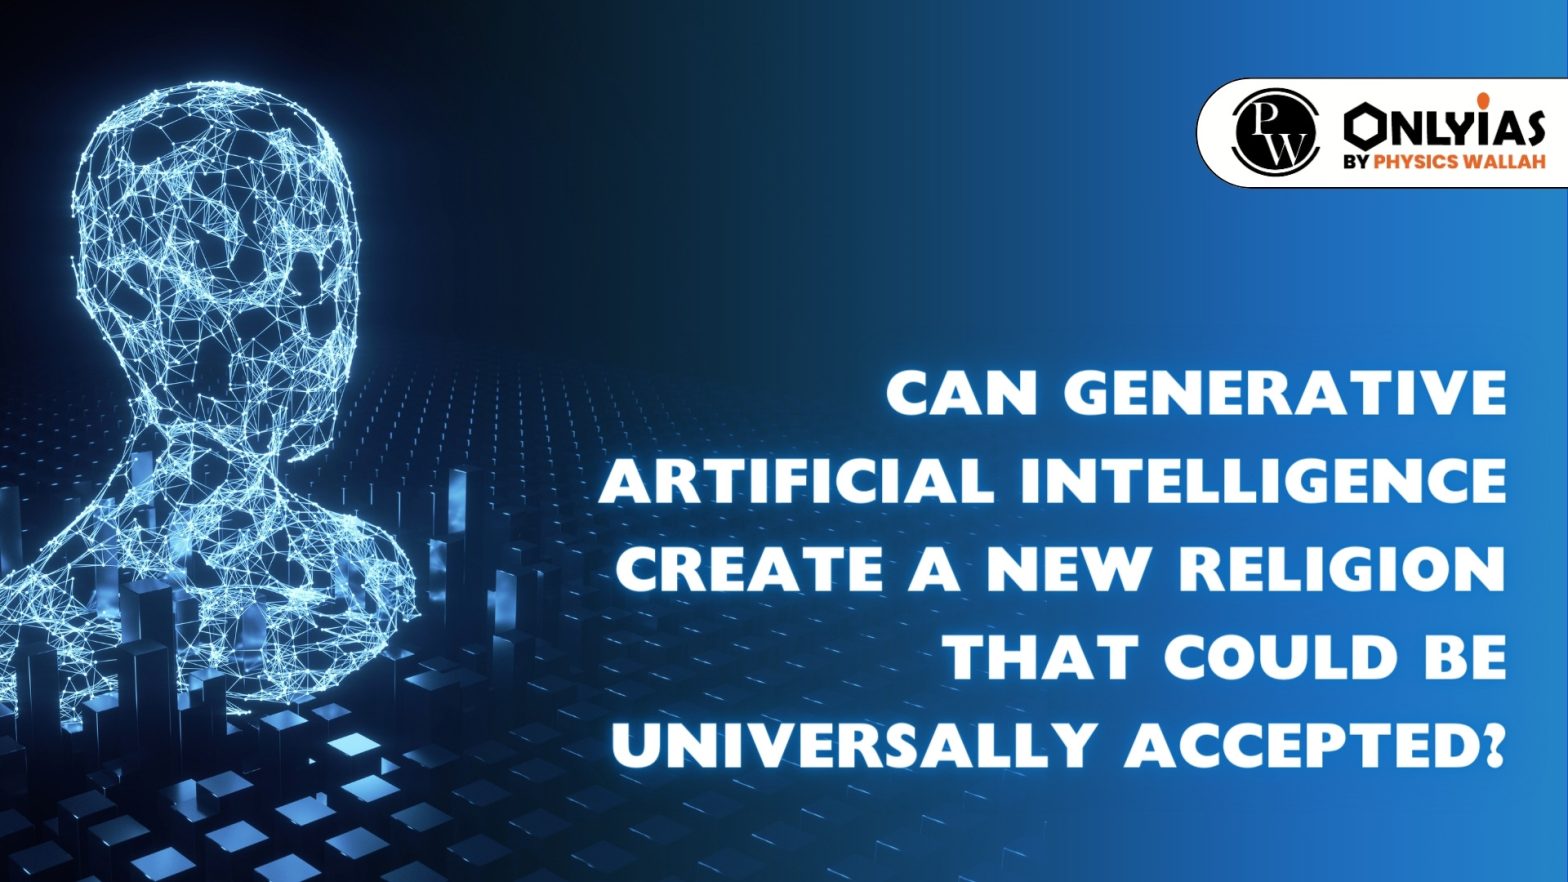 Can Generative Artificial Intelligence Create a New Religion that could be universally accepted?